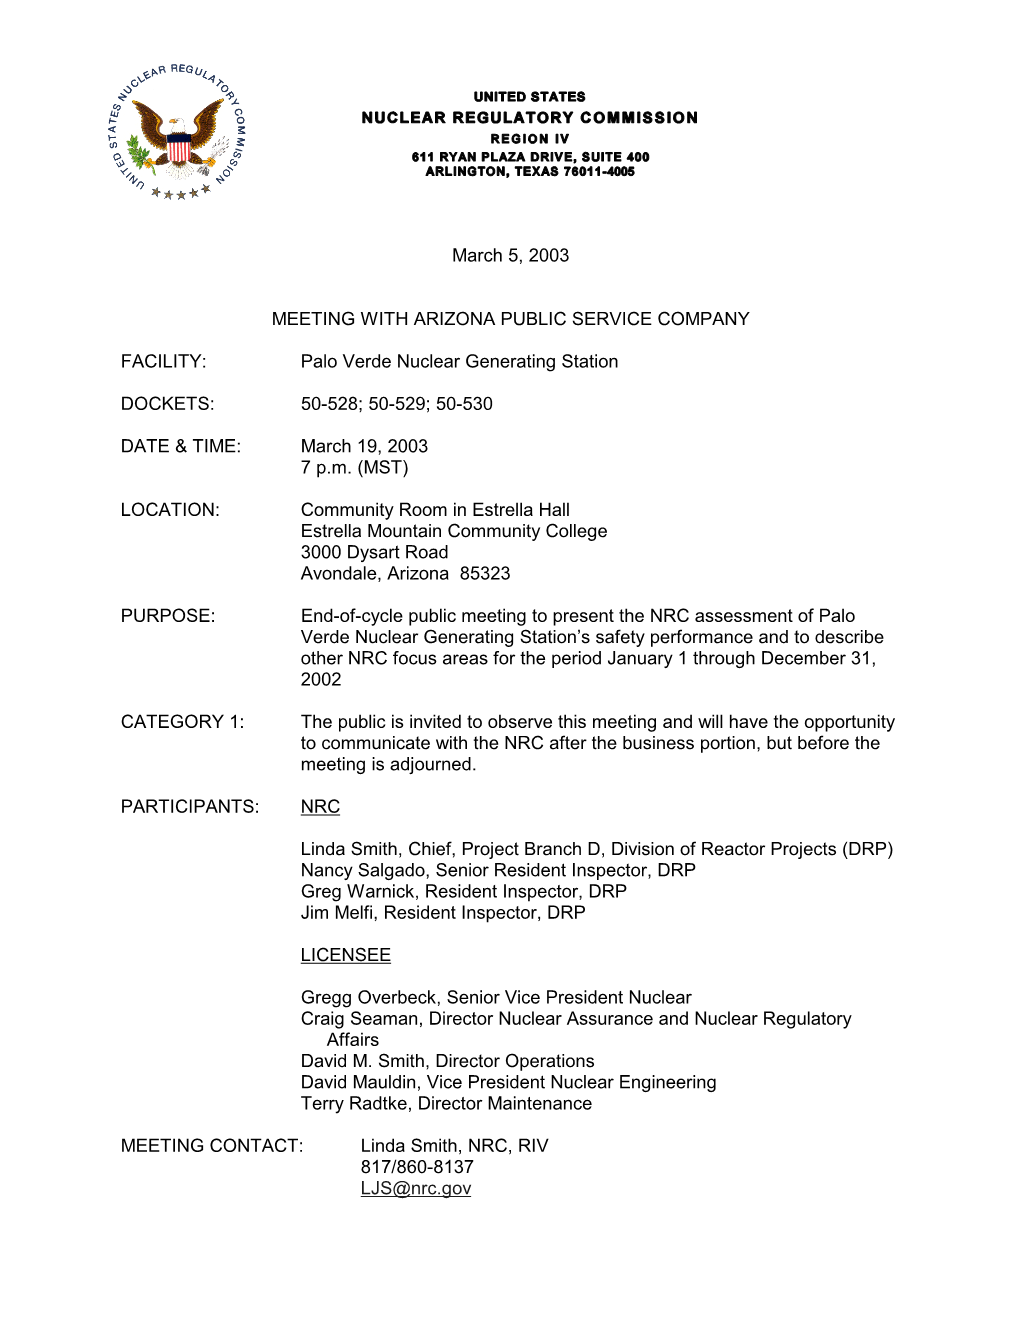 03/19/2003 Notice of End-Of-Cycle Meeting with Arizona Public Service